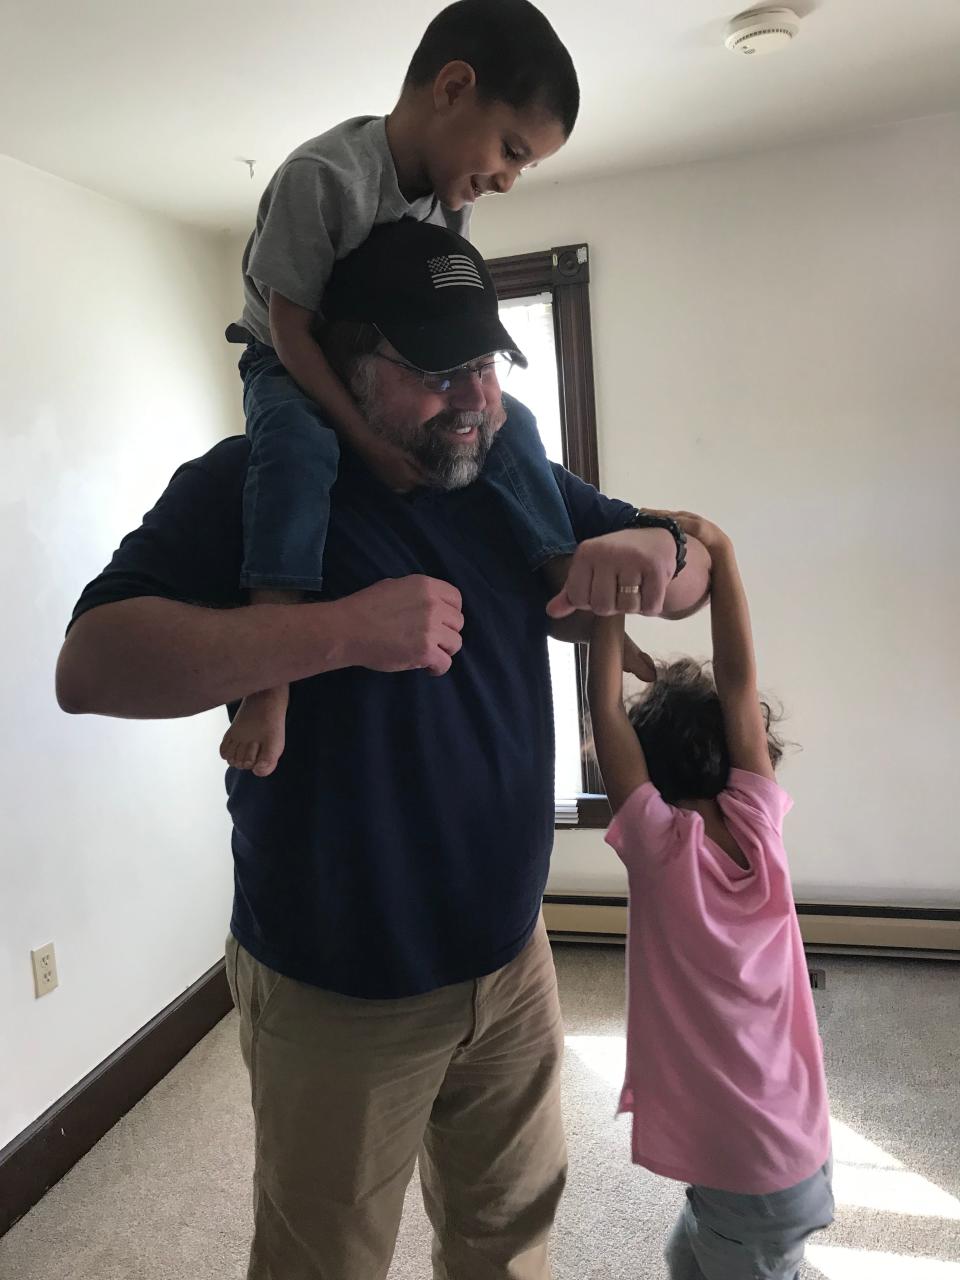 Matt Coburn, a retired Green Beret, plays with Zainab and Rashid as the family moves in to their new rental house in Pennsylvania.